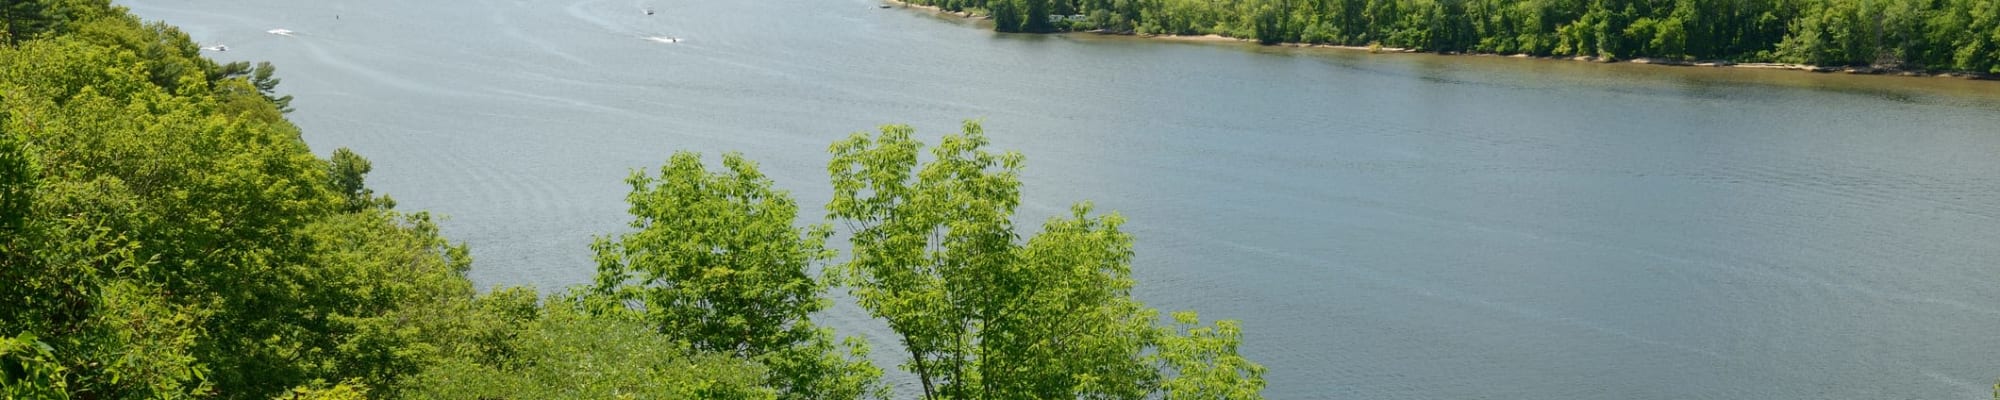 Aerial view of the Connecticut River